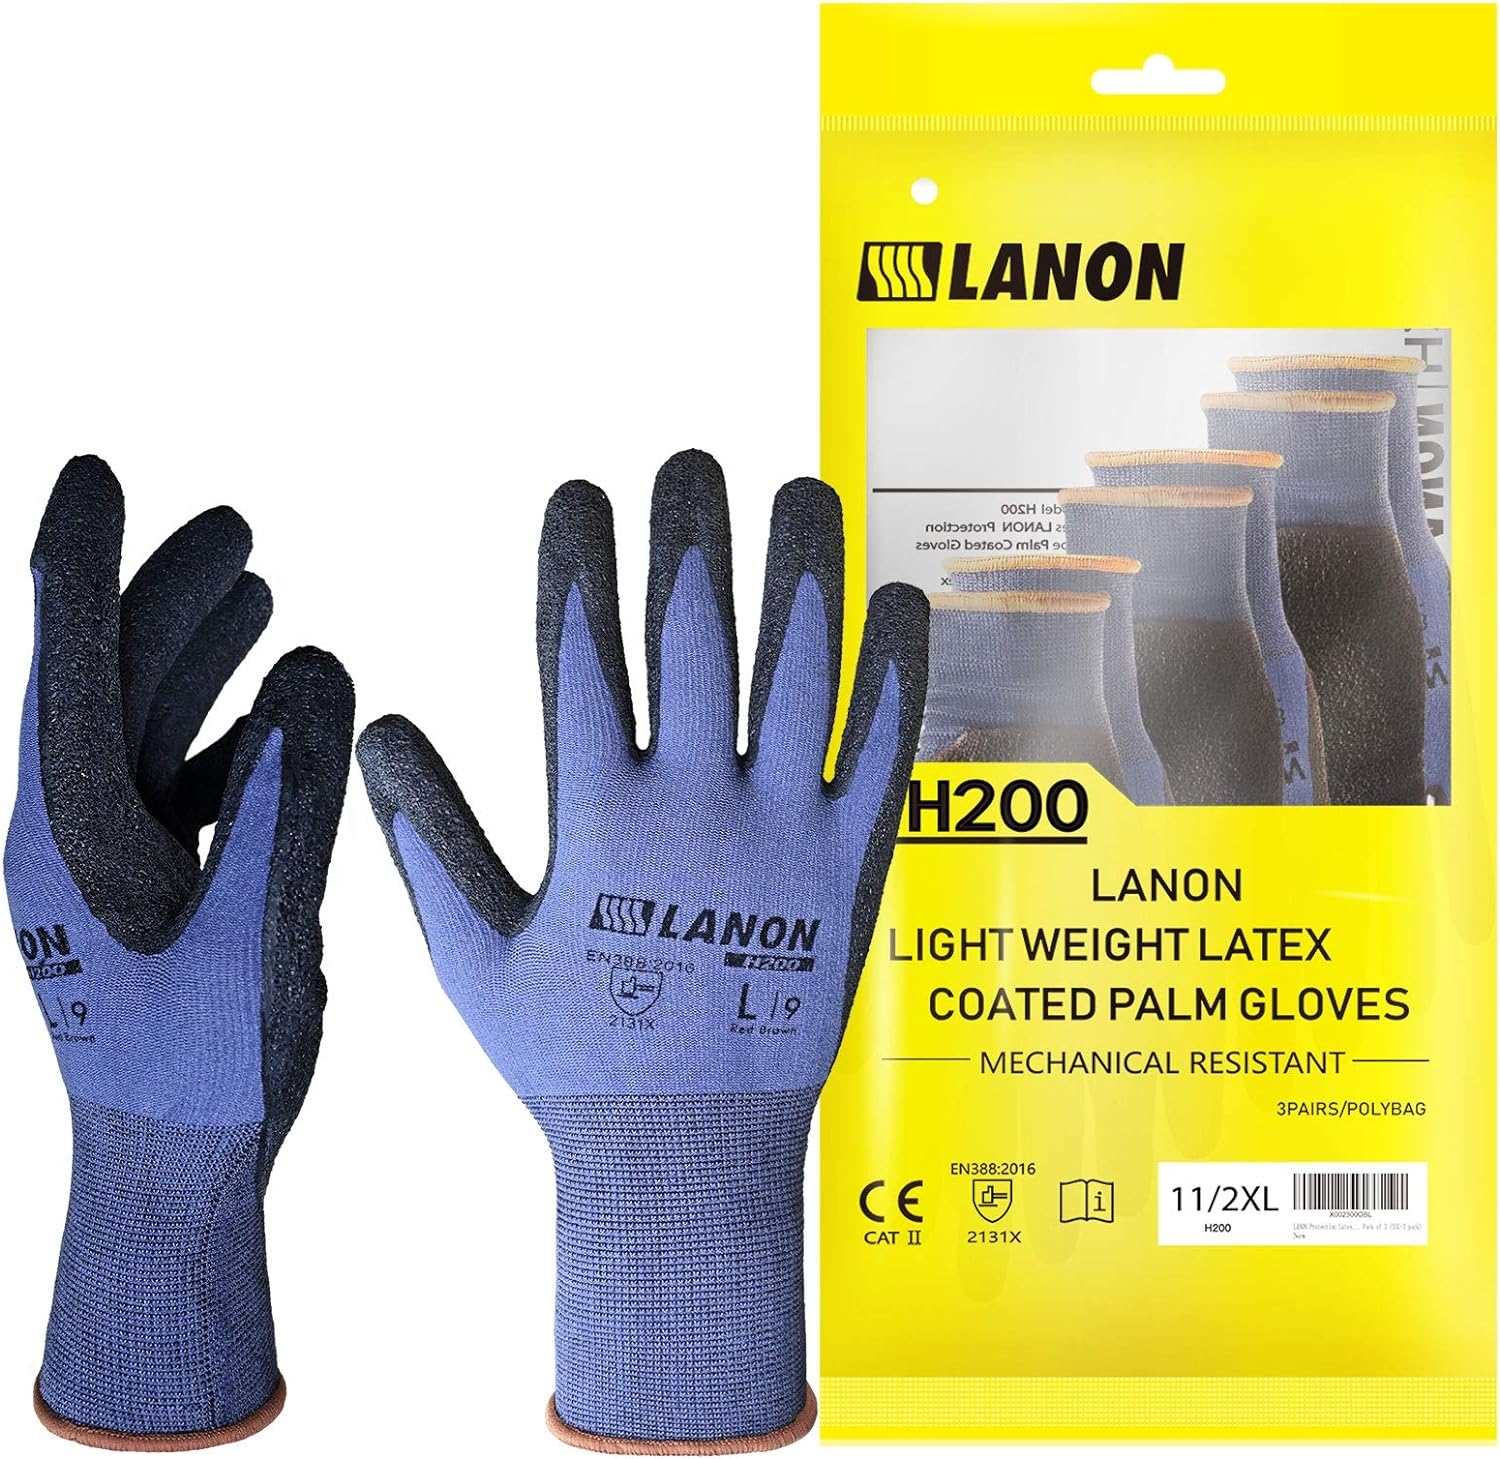 LANON 3 Pairs Safety Work Gloves, 3D Seamless Elastic Fit, Nylon with Lycra Liner, Natural Rubber Crinkle Coating, Size 8